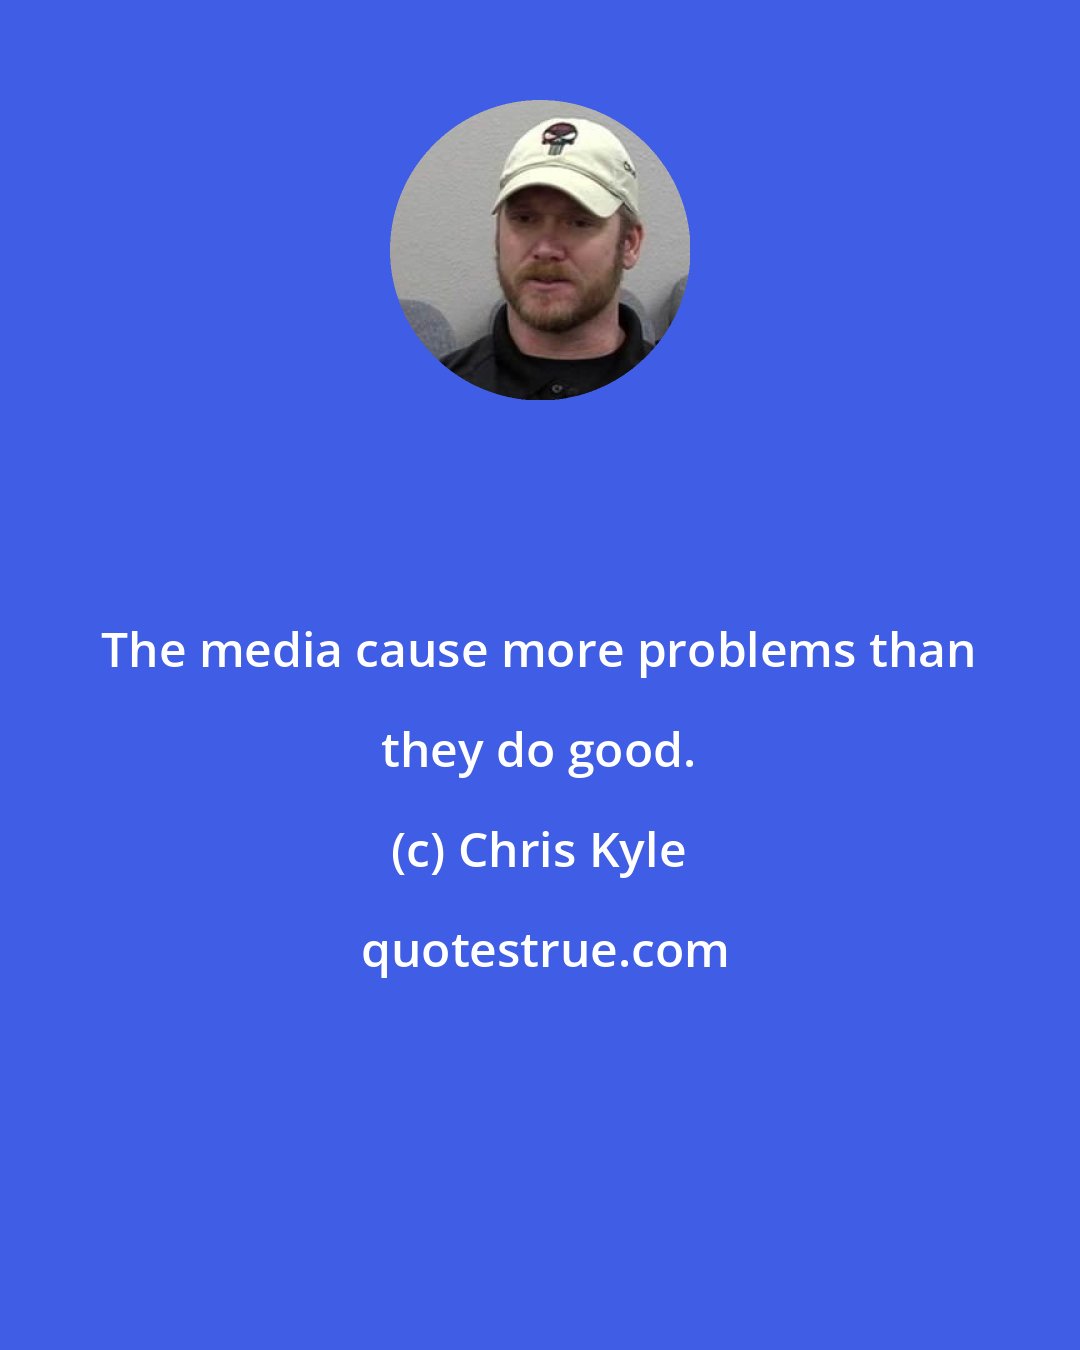 Chris Kyle: The media cause more problems than they do good.